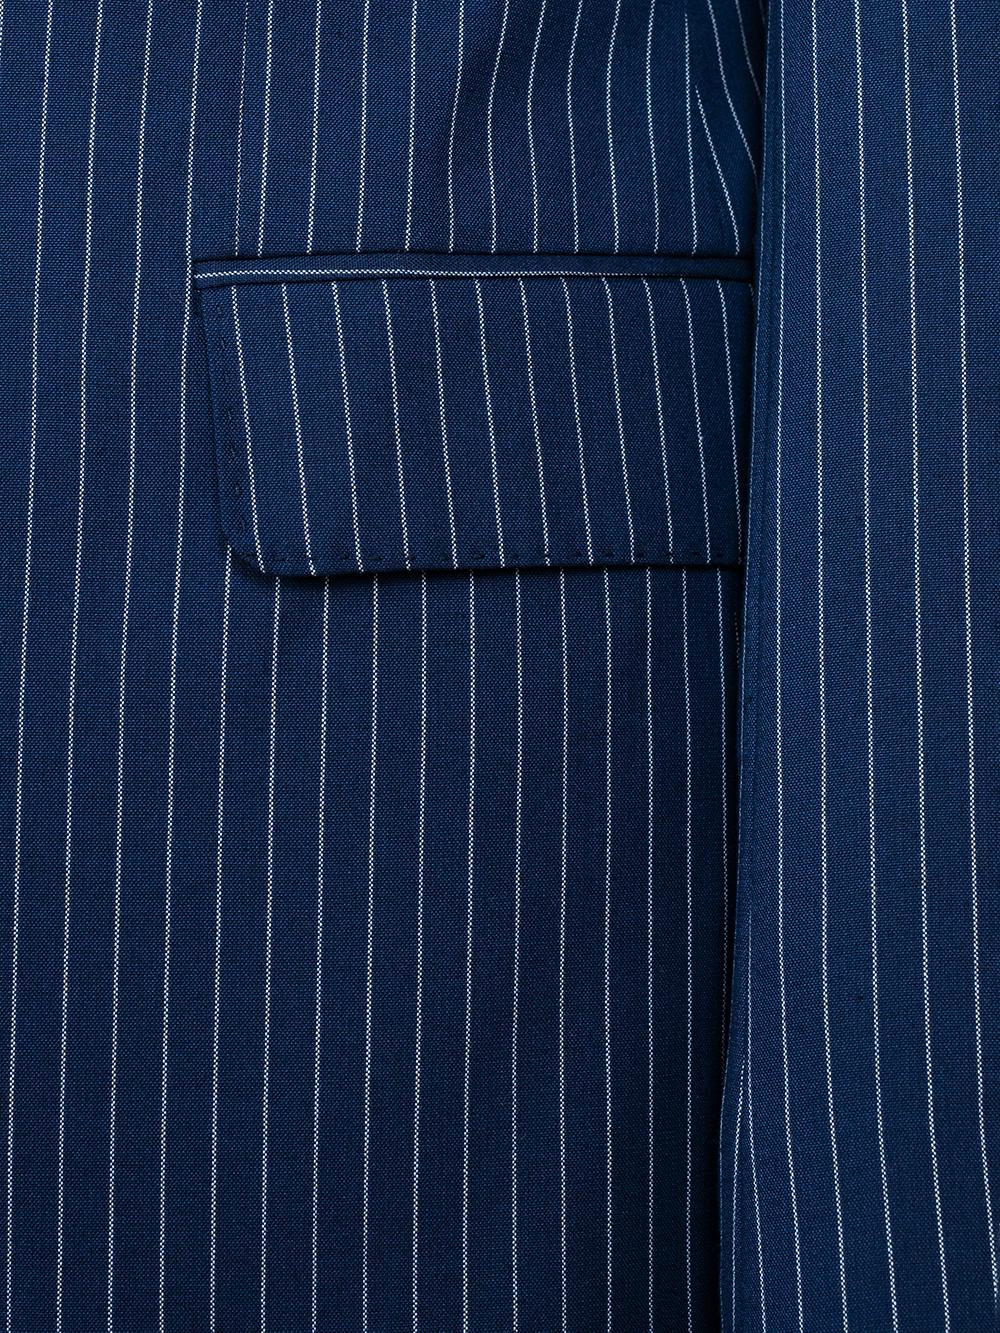 Double Breasted Blue Navy Bespoke Men Suit Tailored